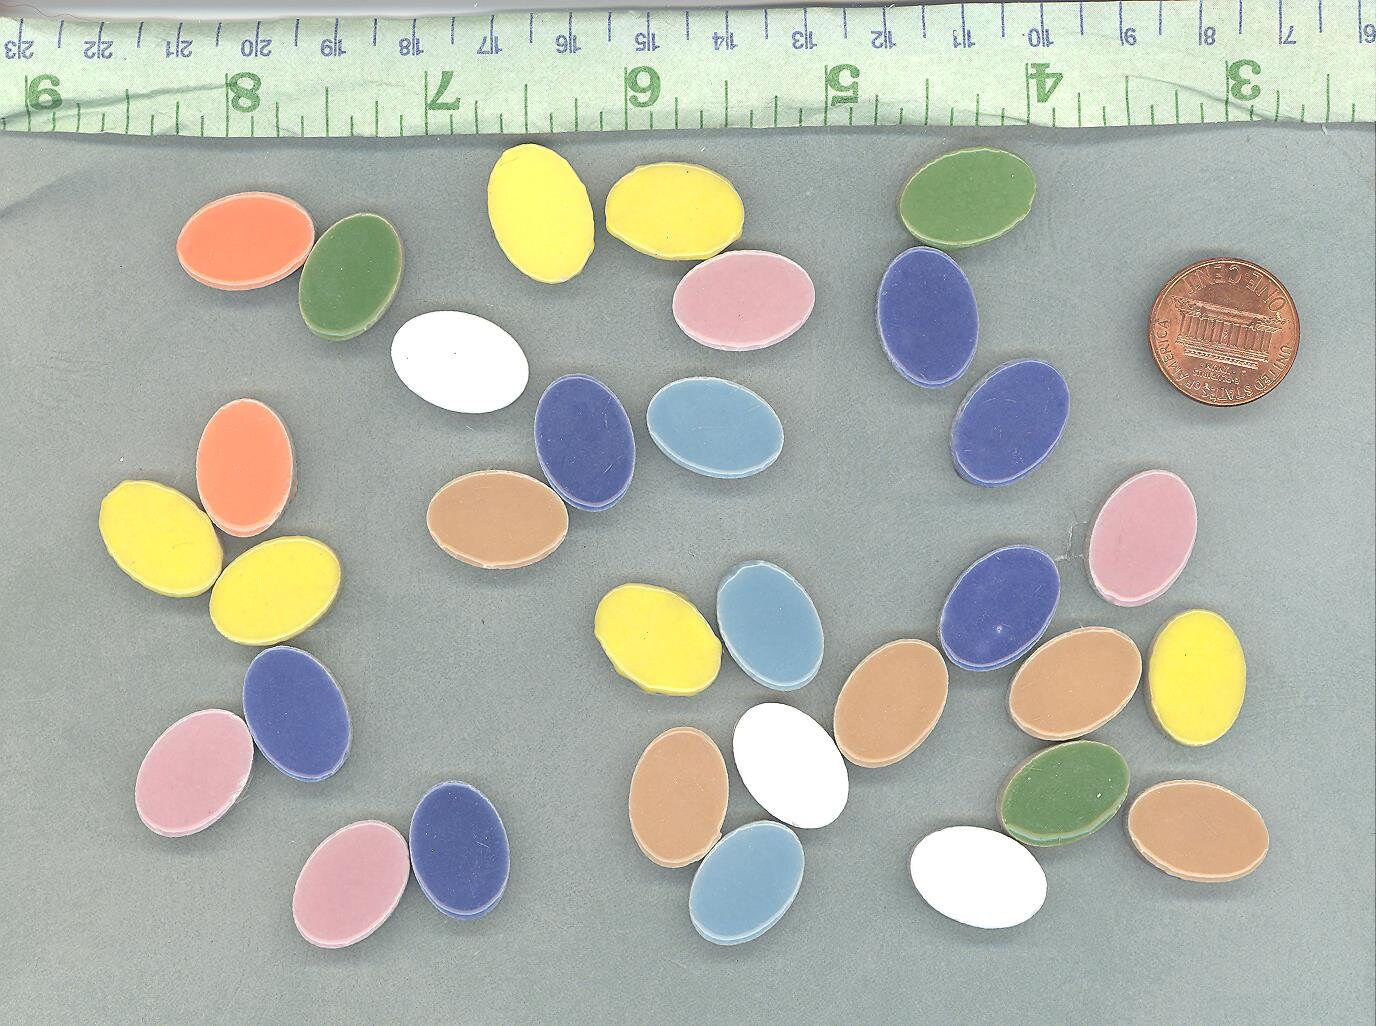 Oval Mosaic Tiles - 50 Ceramic 3/4" Inch Tiles in Assorted Colors